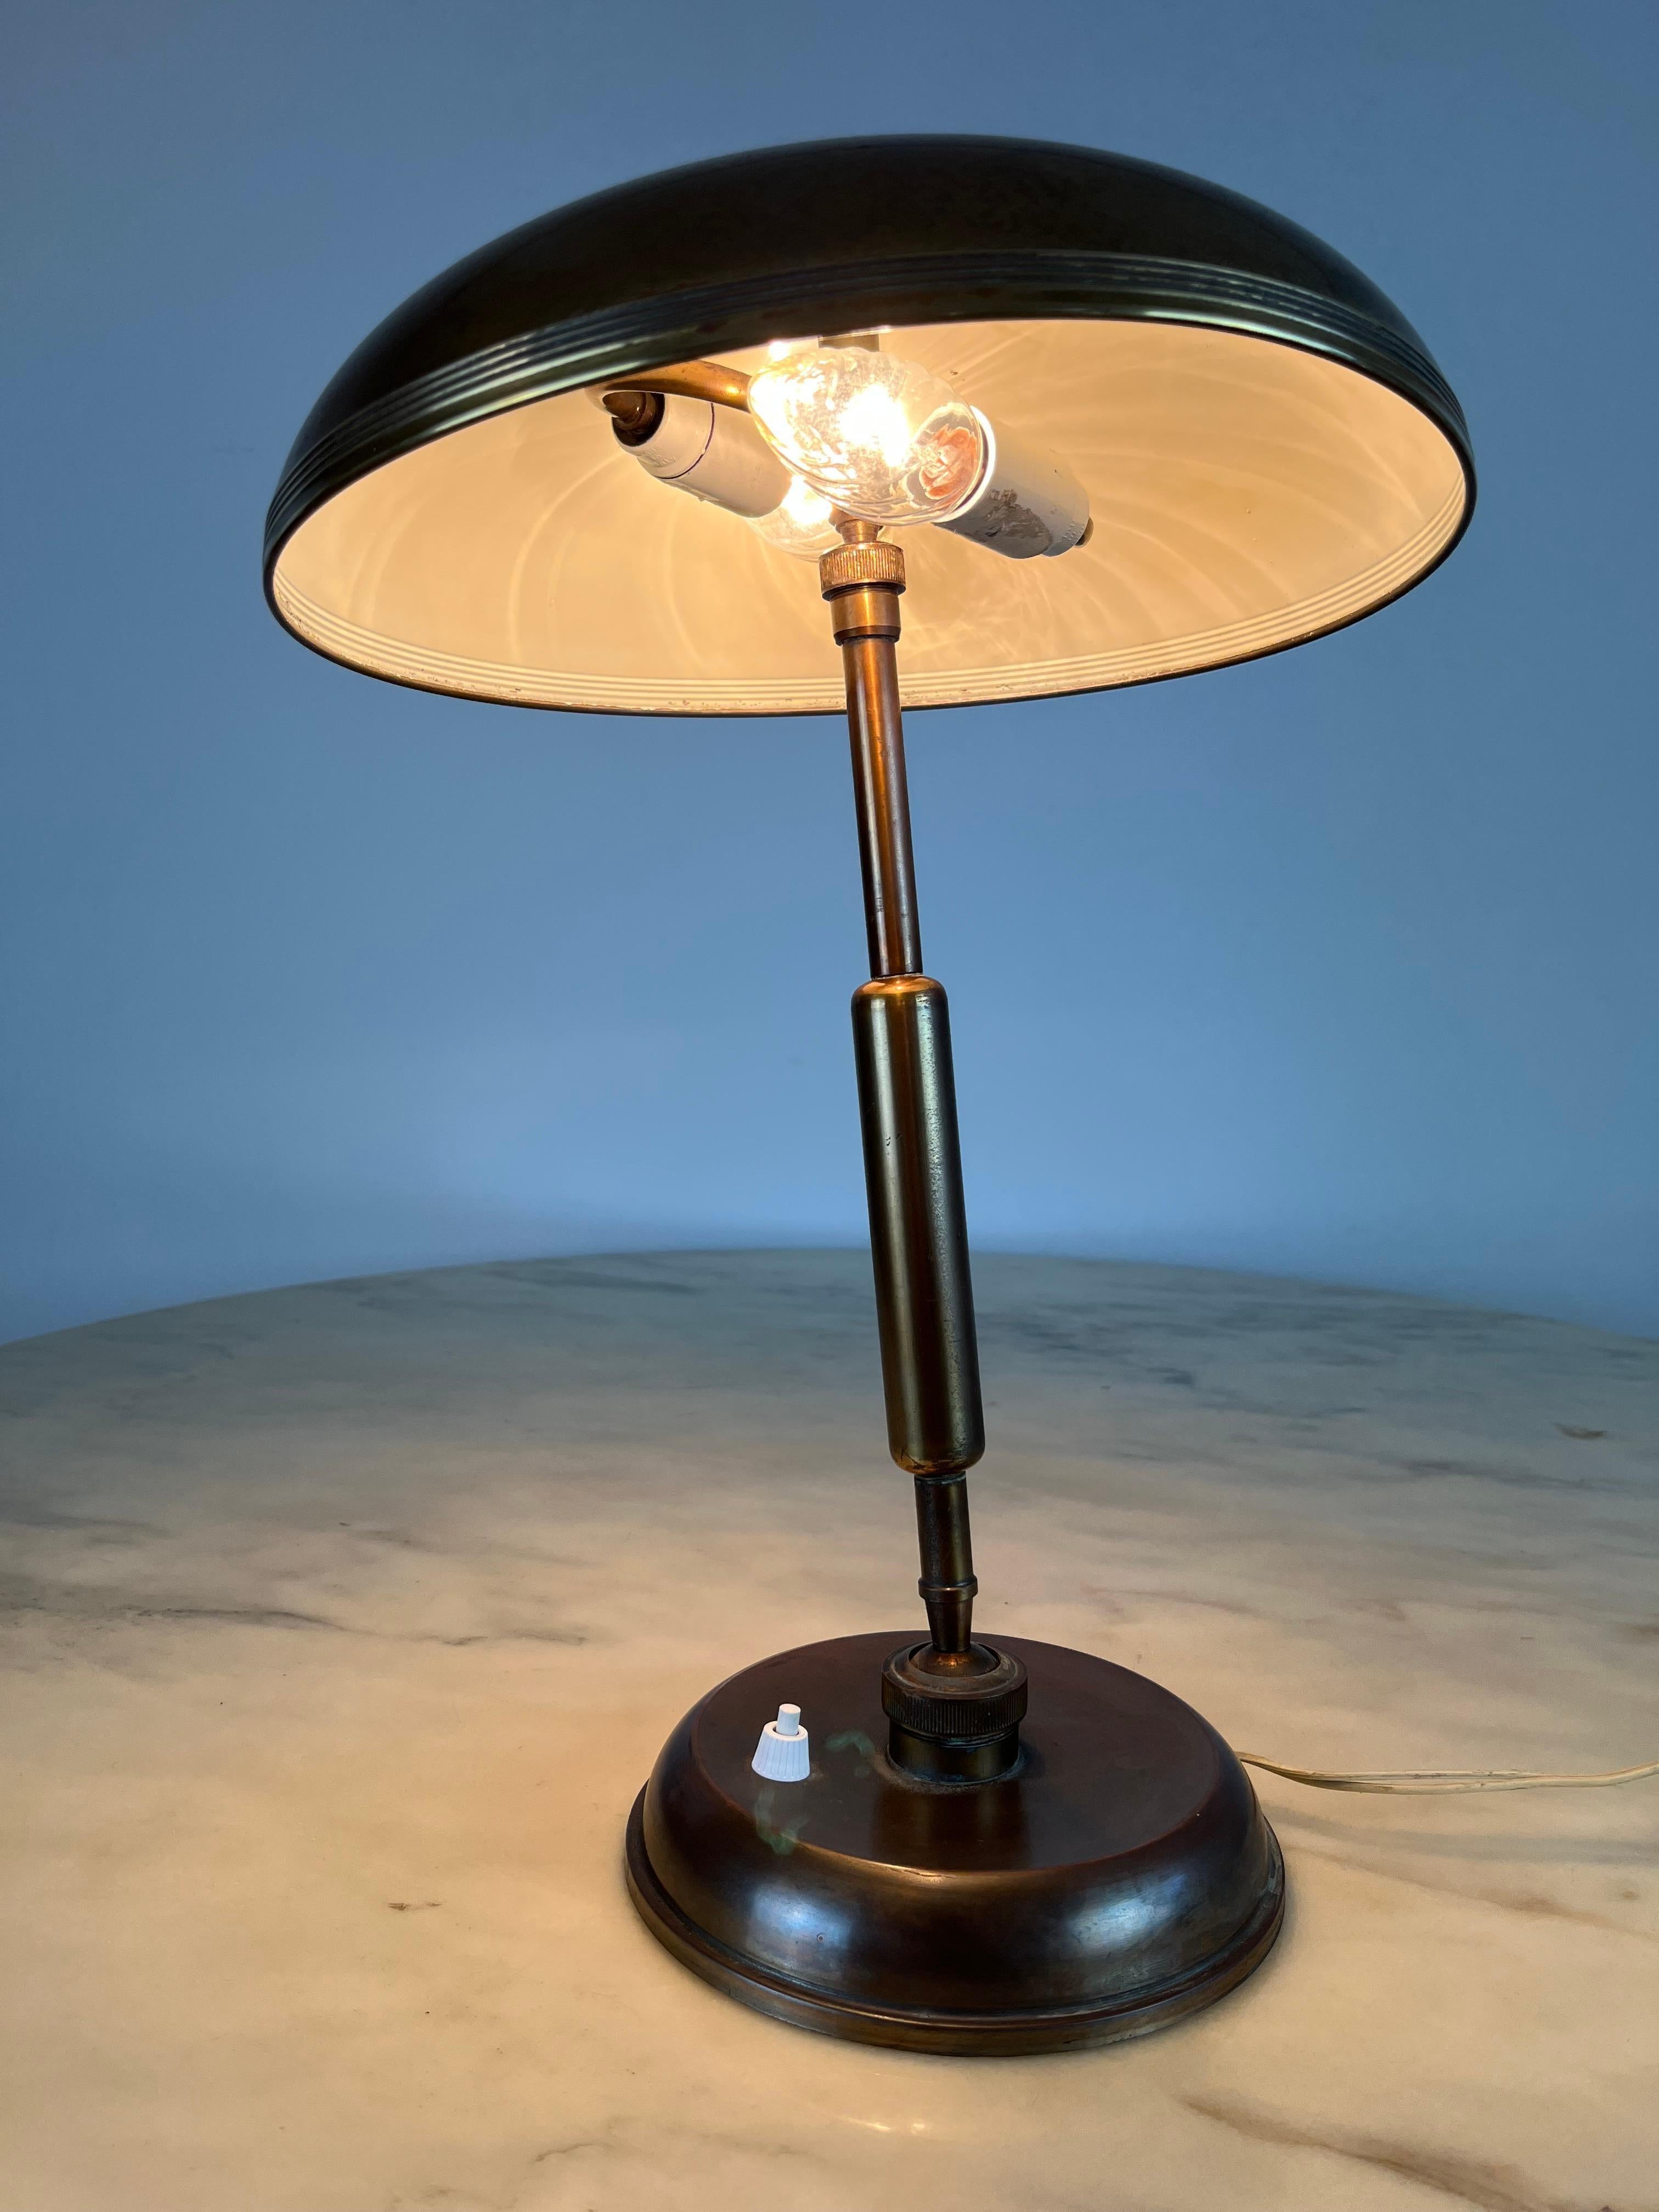 Pre-war Italian brass desk lamp, circa 1940s. A Classic desk lamp which combines the characteristics of the Art Deco and Art Nouveau movements. A Lariolux ministeriale rounded shade tops an adjustable brass support stem. The brass features a